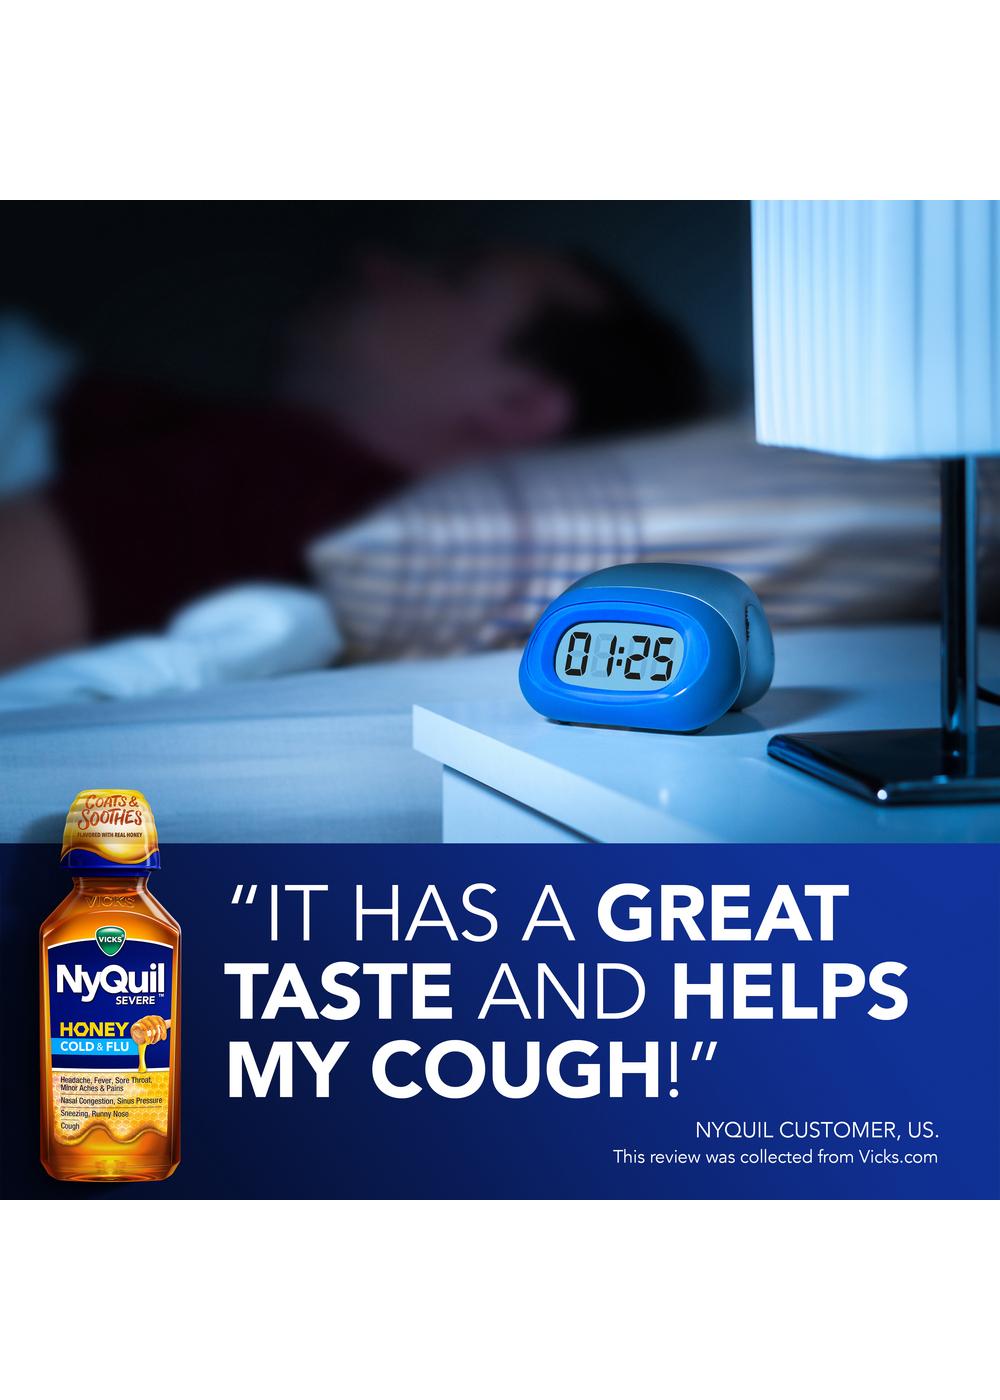 Vicks NyQuil SEVERE Cold & Flu Liquid - Honey; image 9 of 11